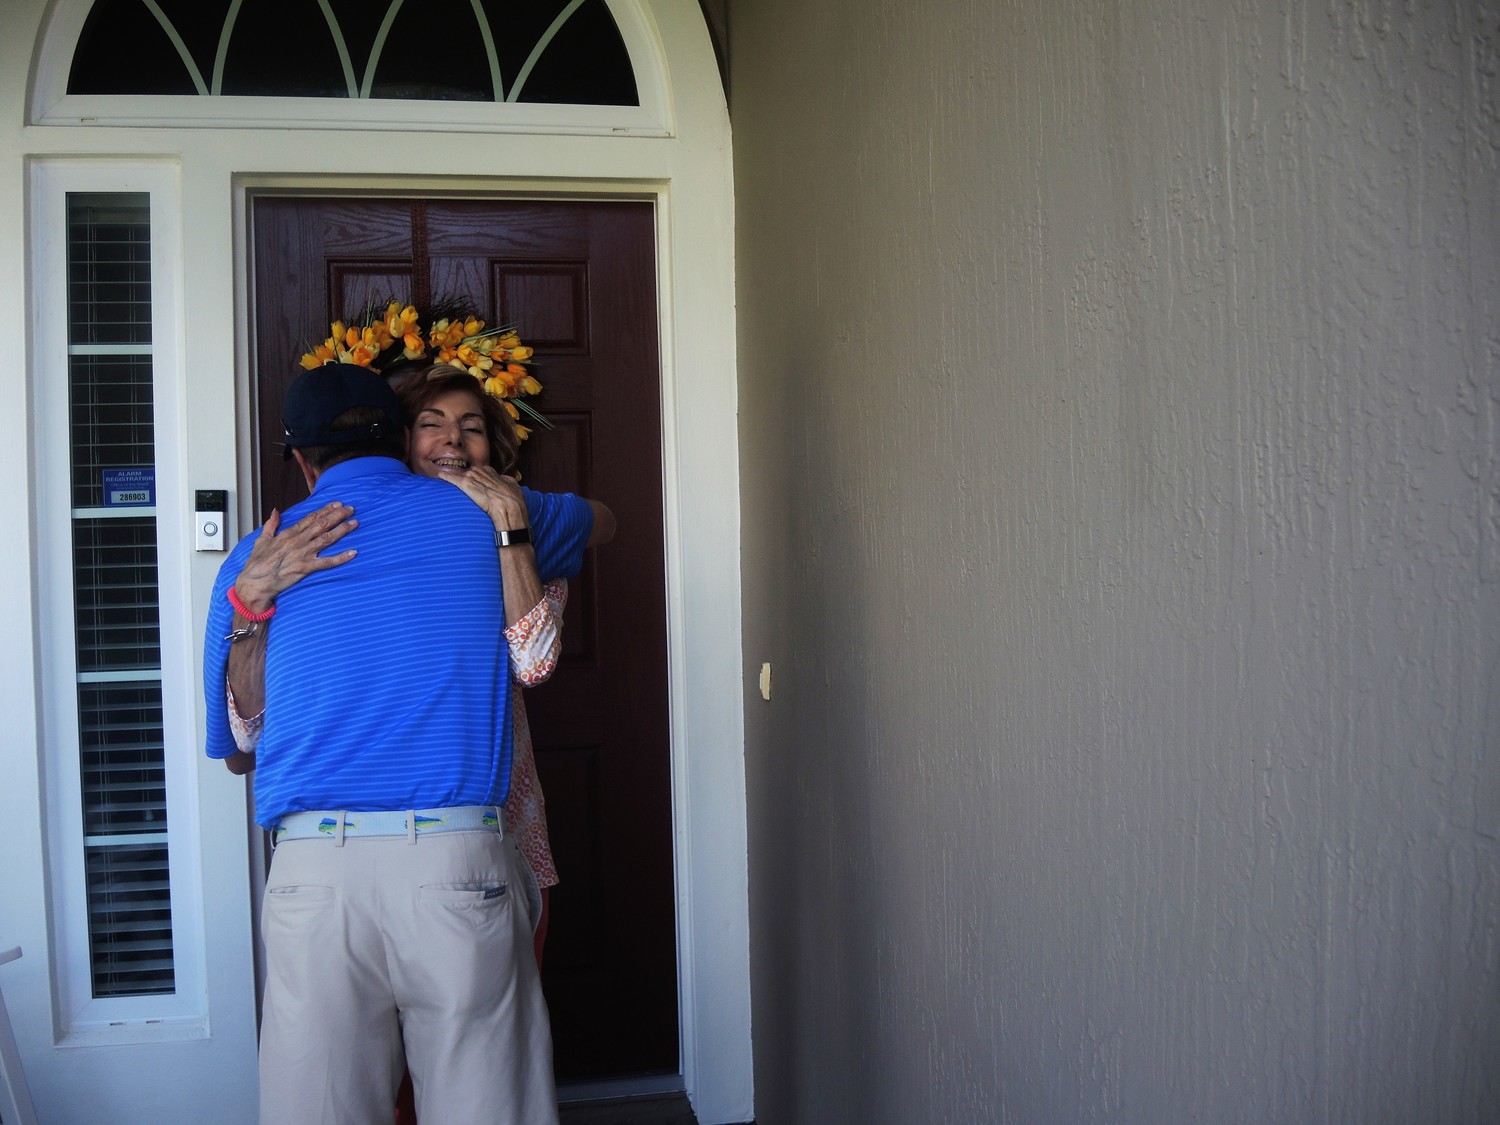 Funk hugs Simpson after he arrives at her house in the bus.